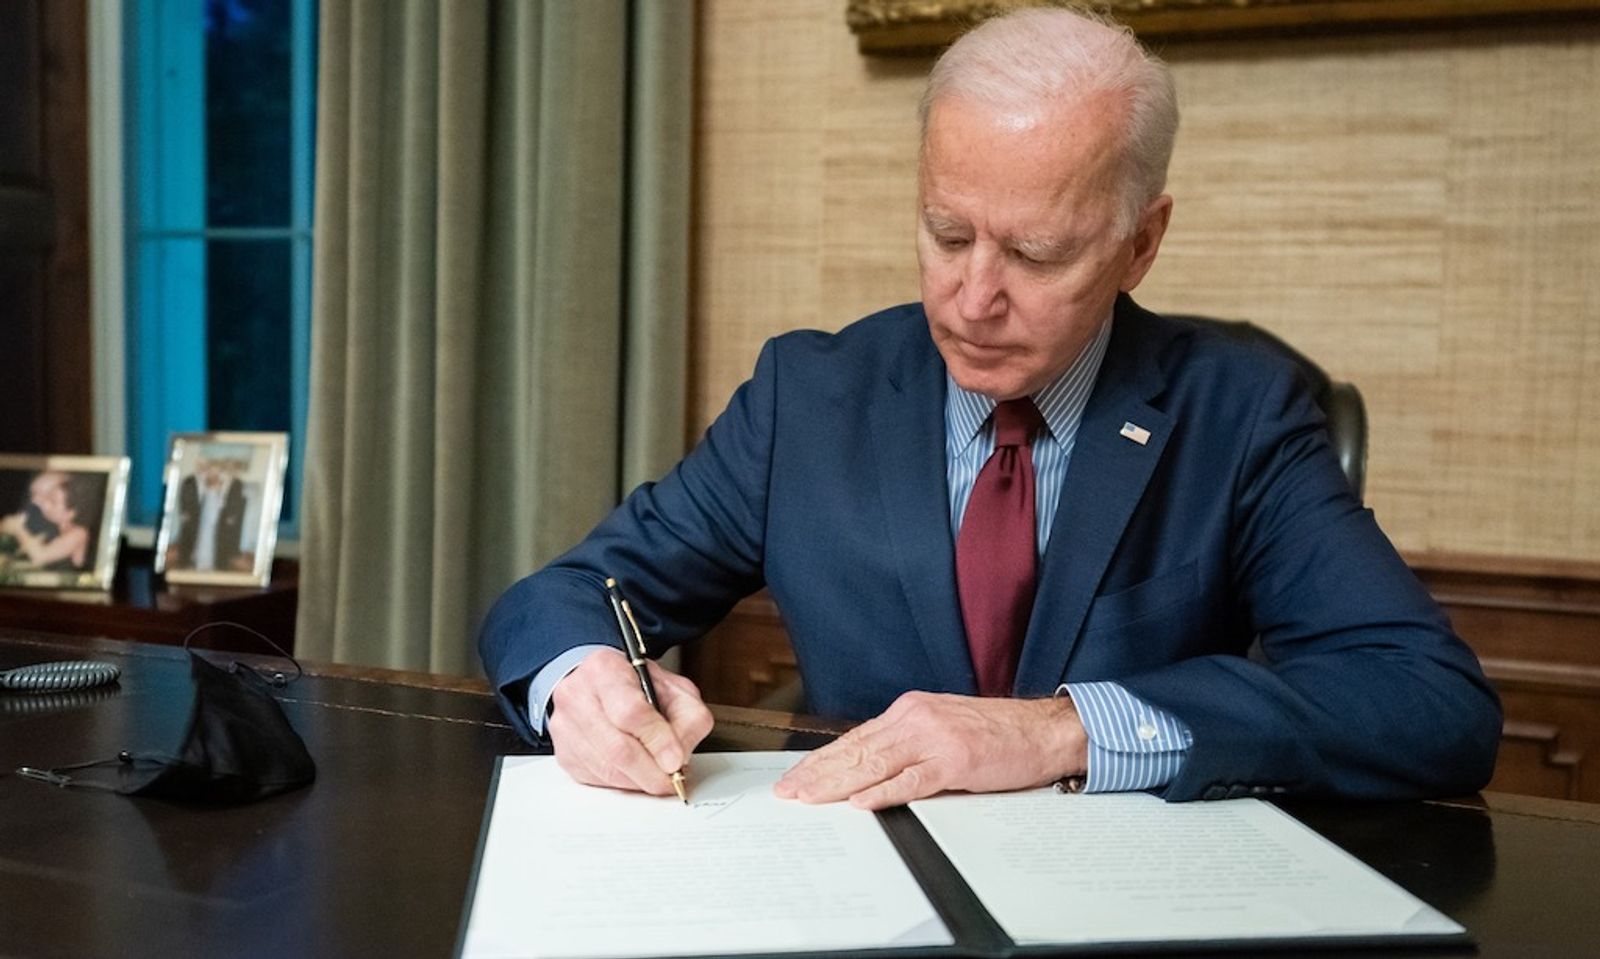 Net Neutrality Activists Pressure Biden to Appoint 5th FCC Member